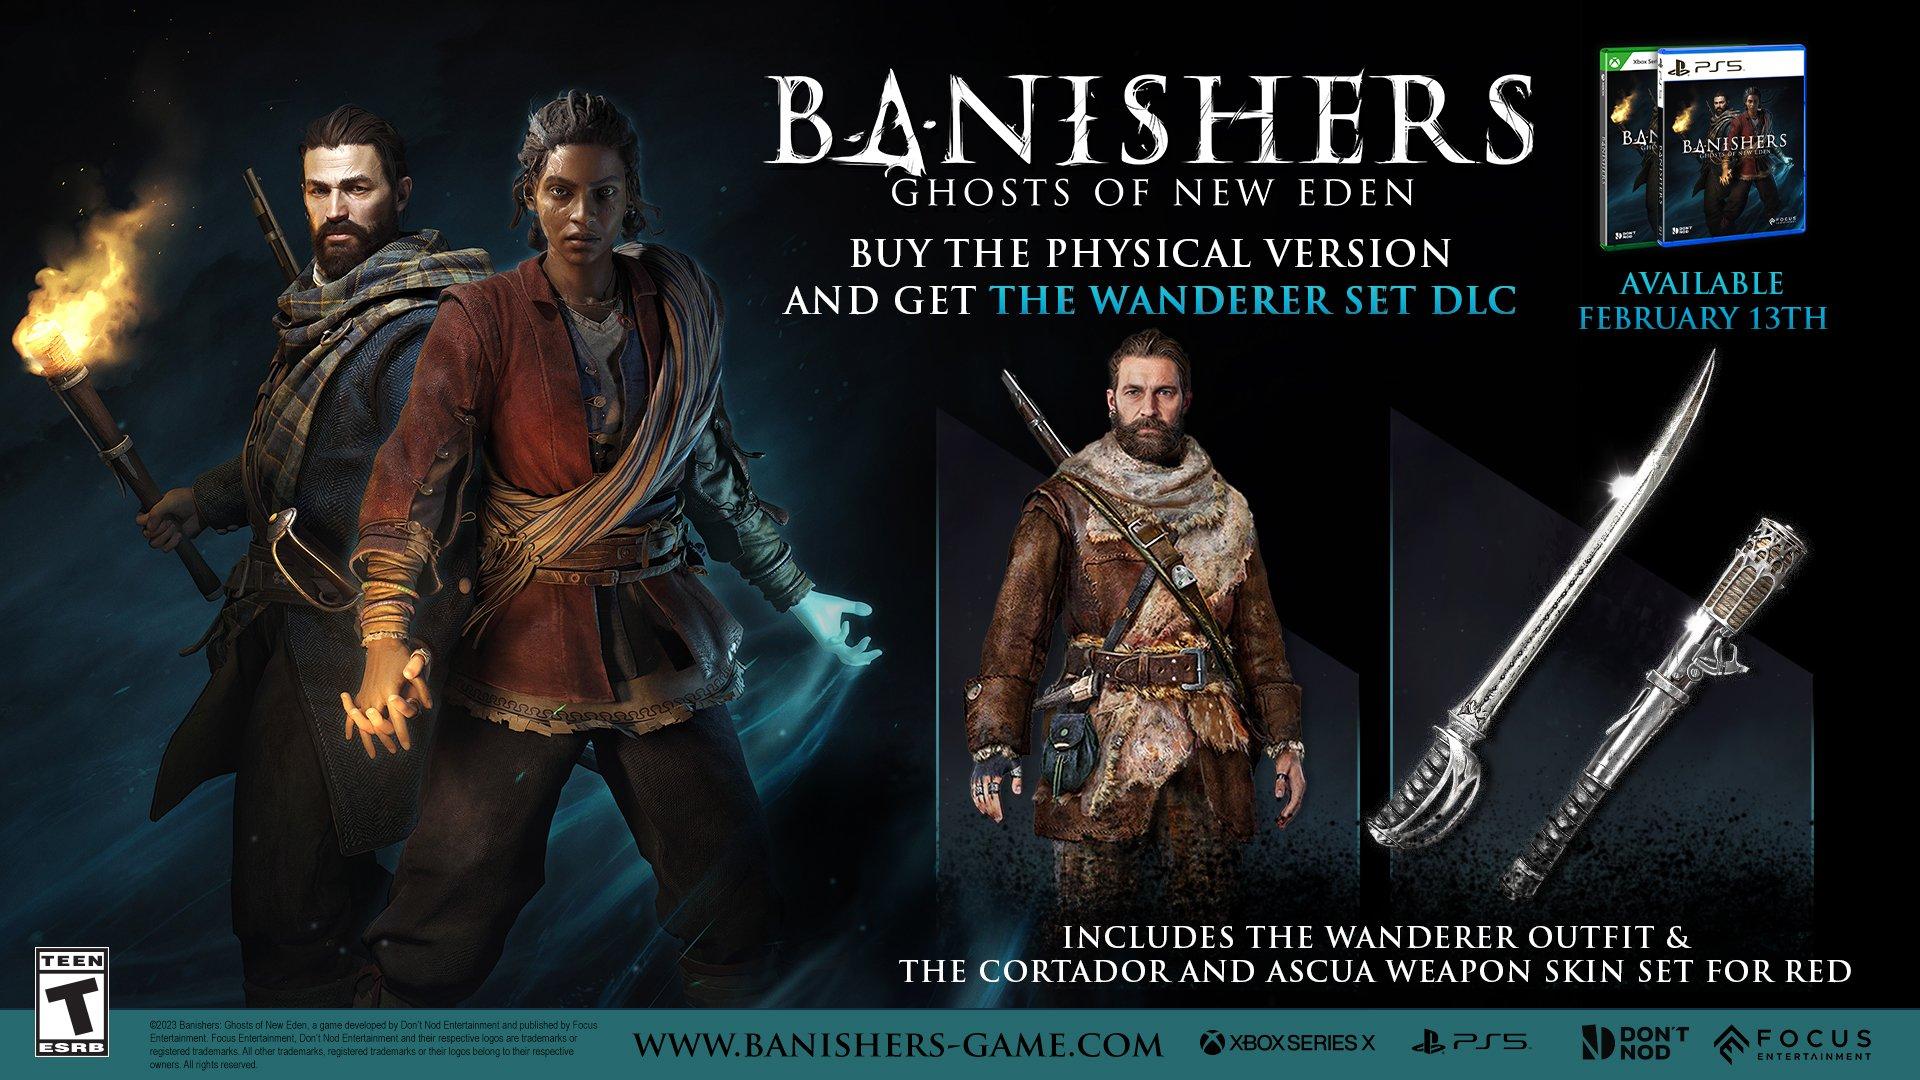 BANISHERS: Ghosts of a New Eden